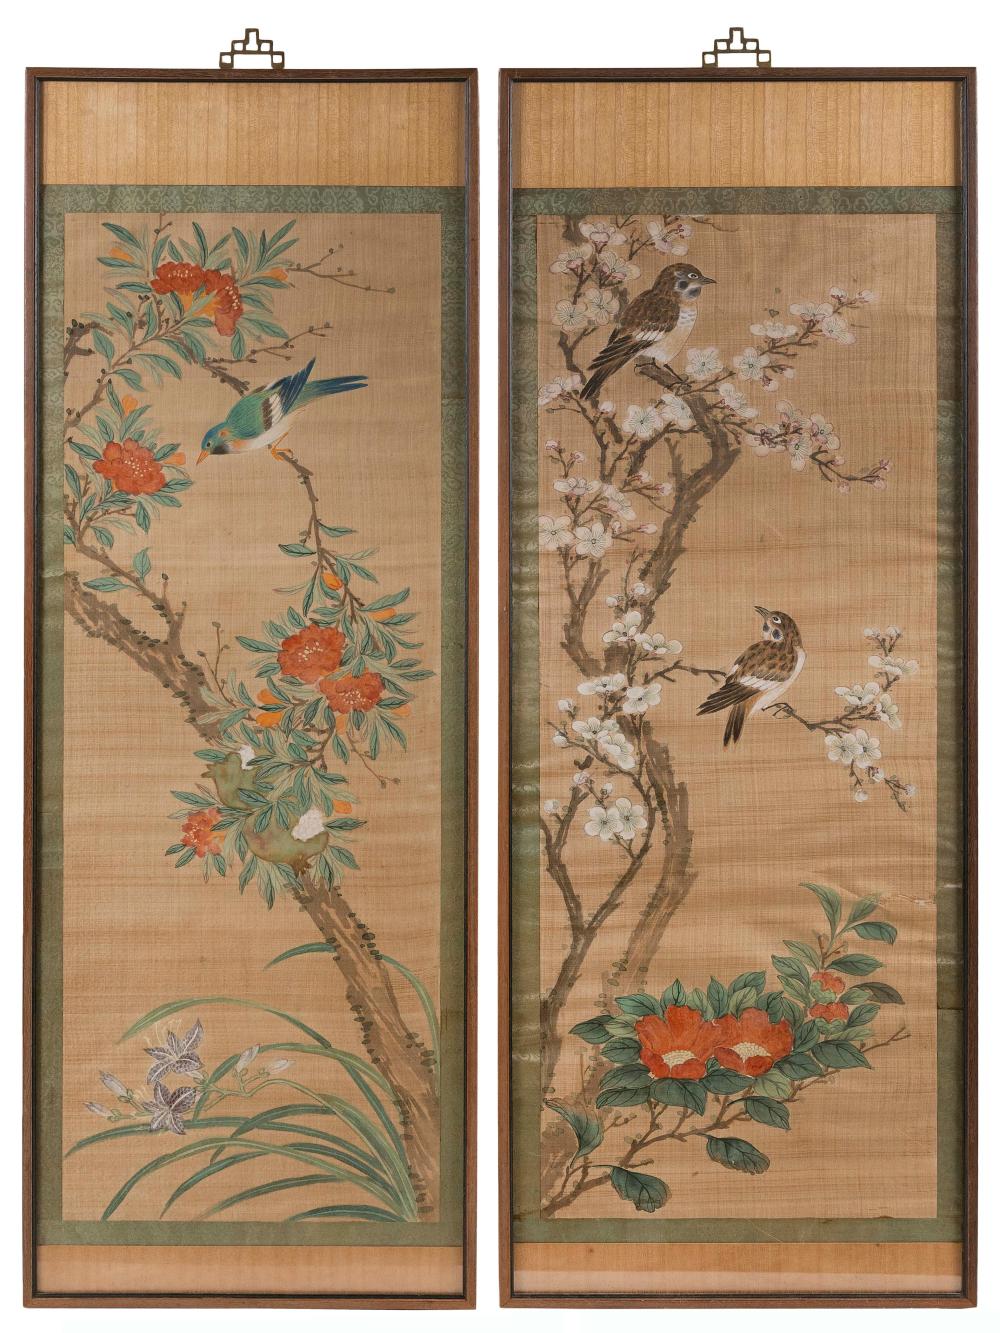 PAIR OF CHINESE PAINTINGS ON SILK